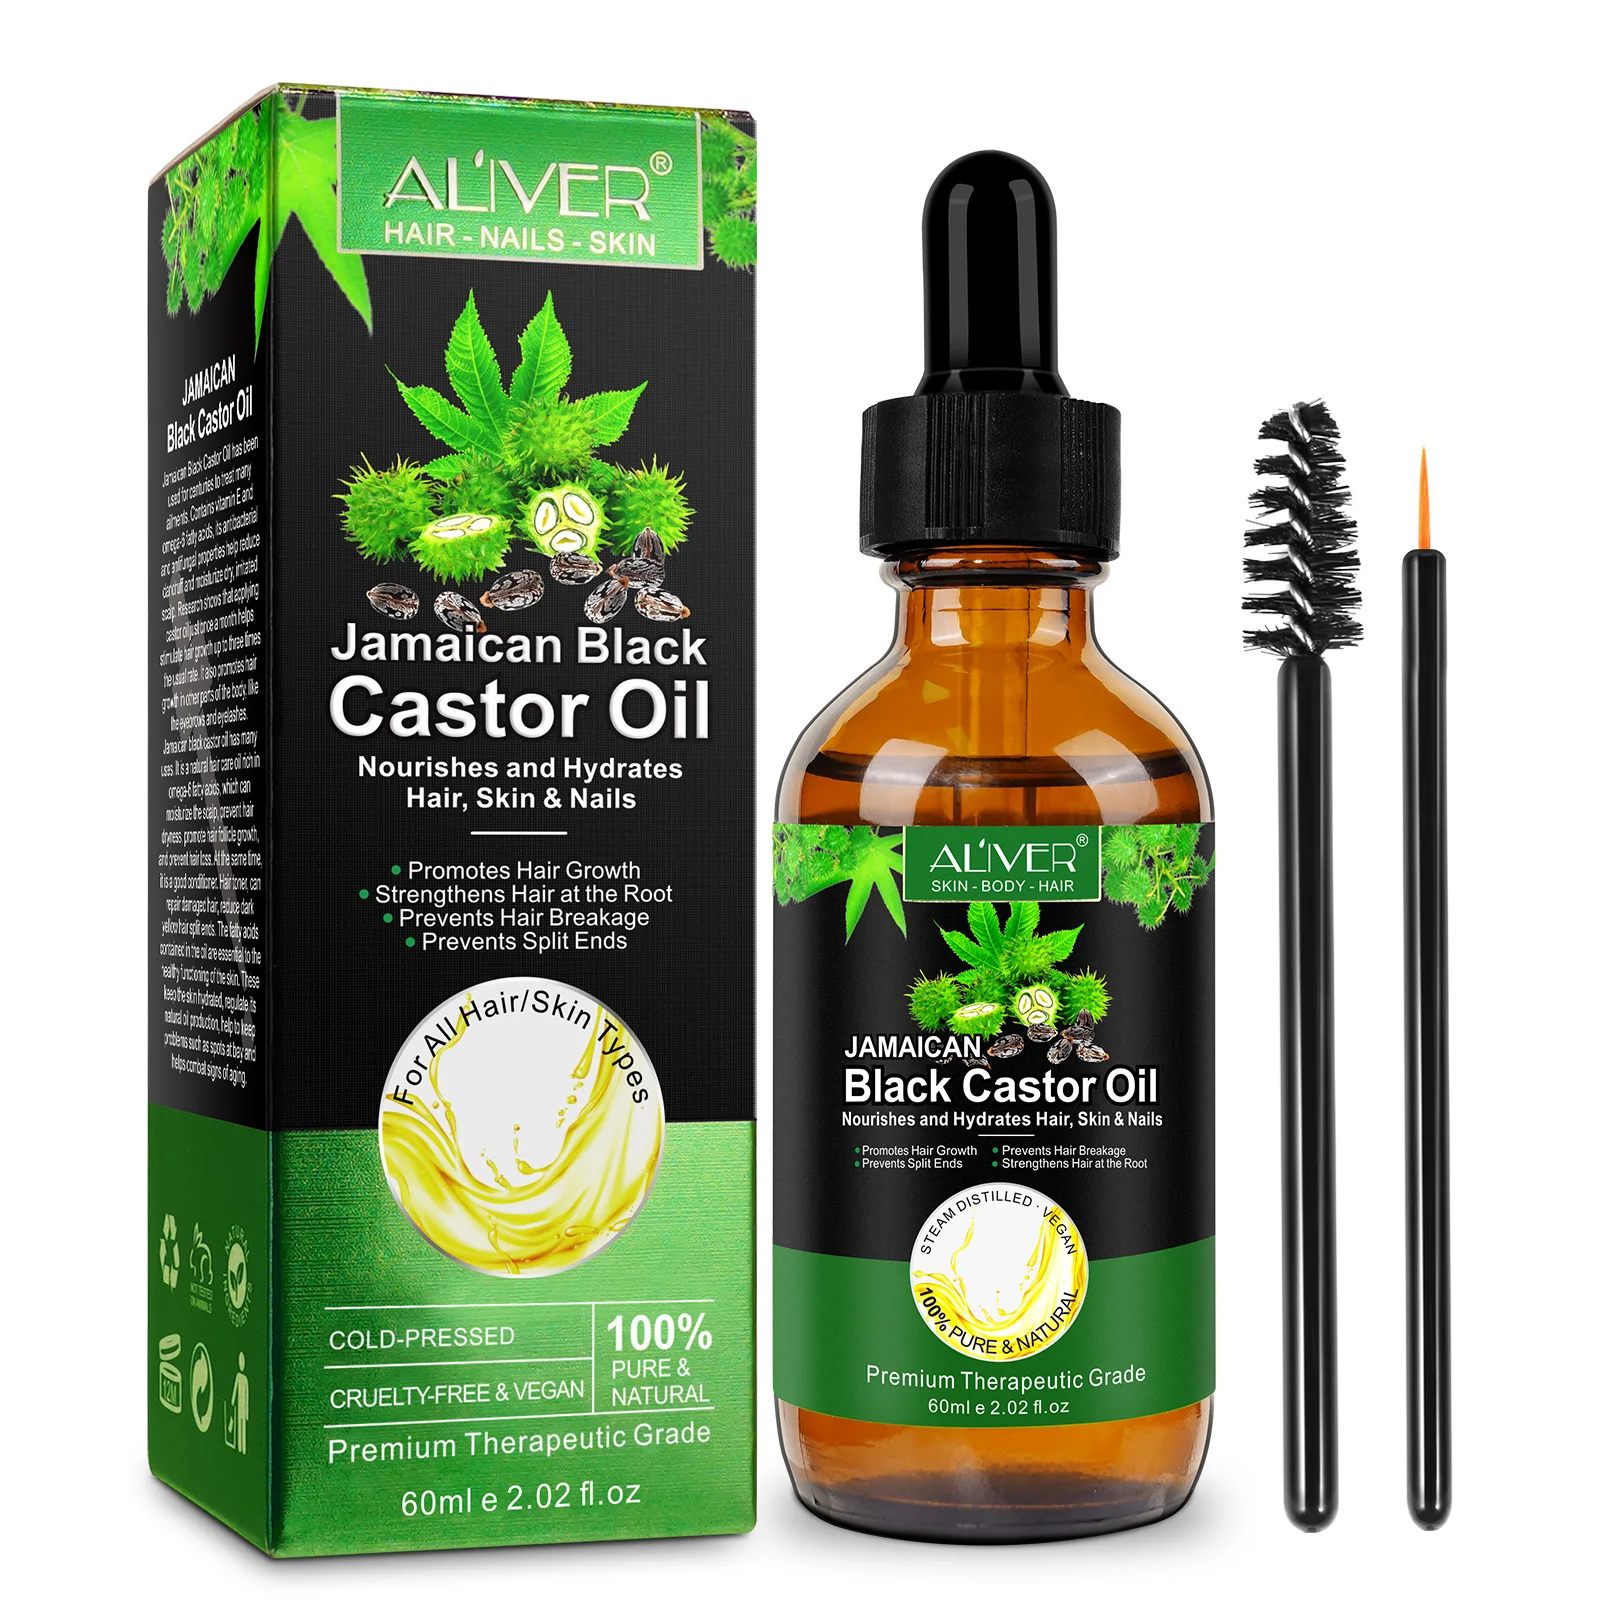 

ALIVER 100% Pure Natural Nourishing Hydrating Hair Nails Organic Jamaican Black Castor Oil for Hair Growth